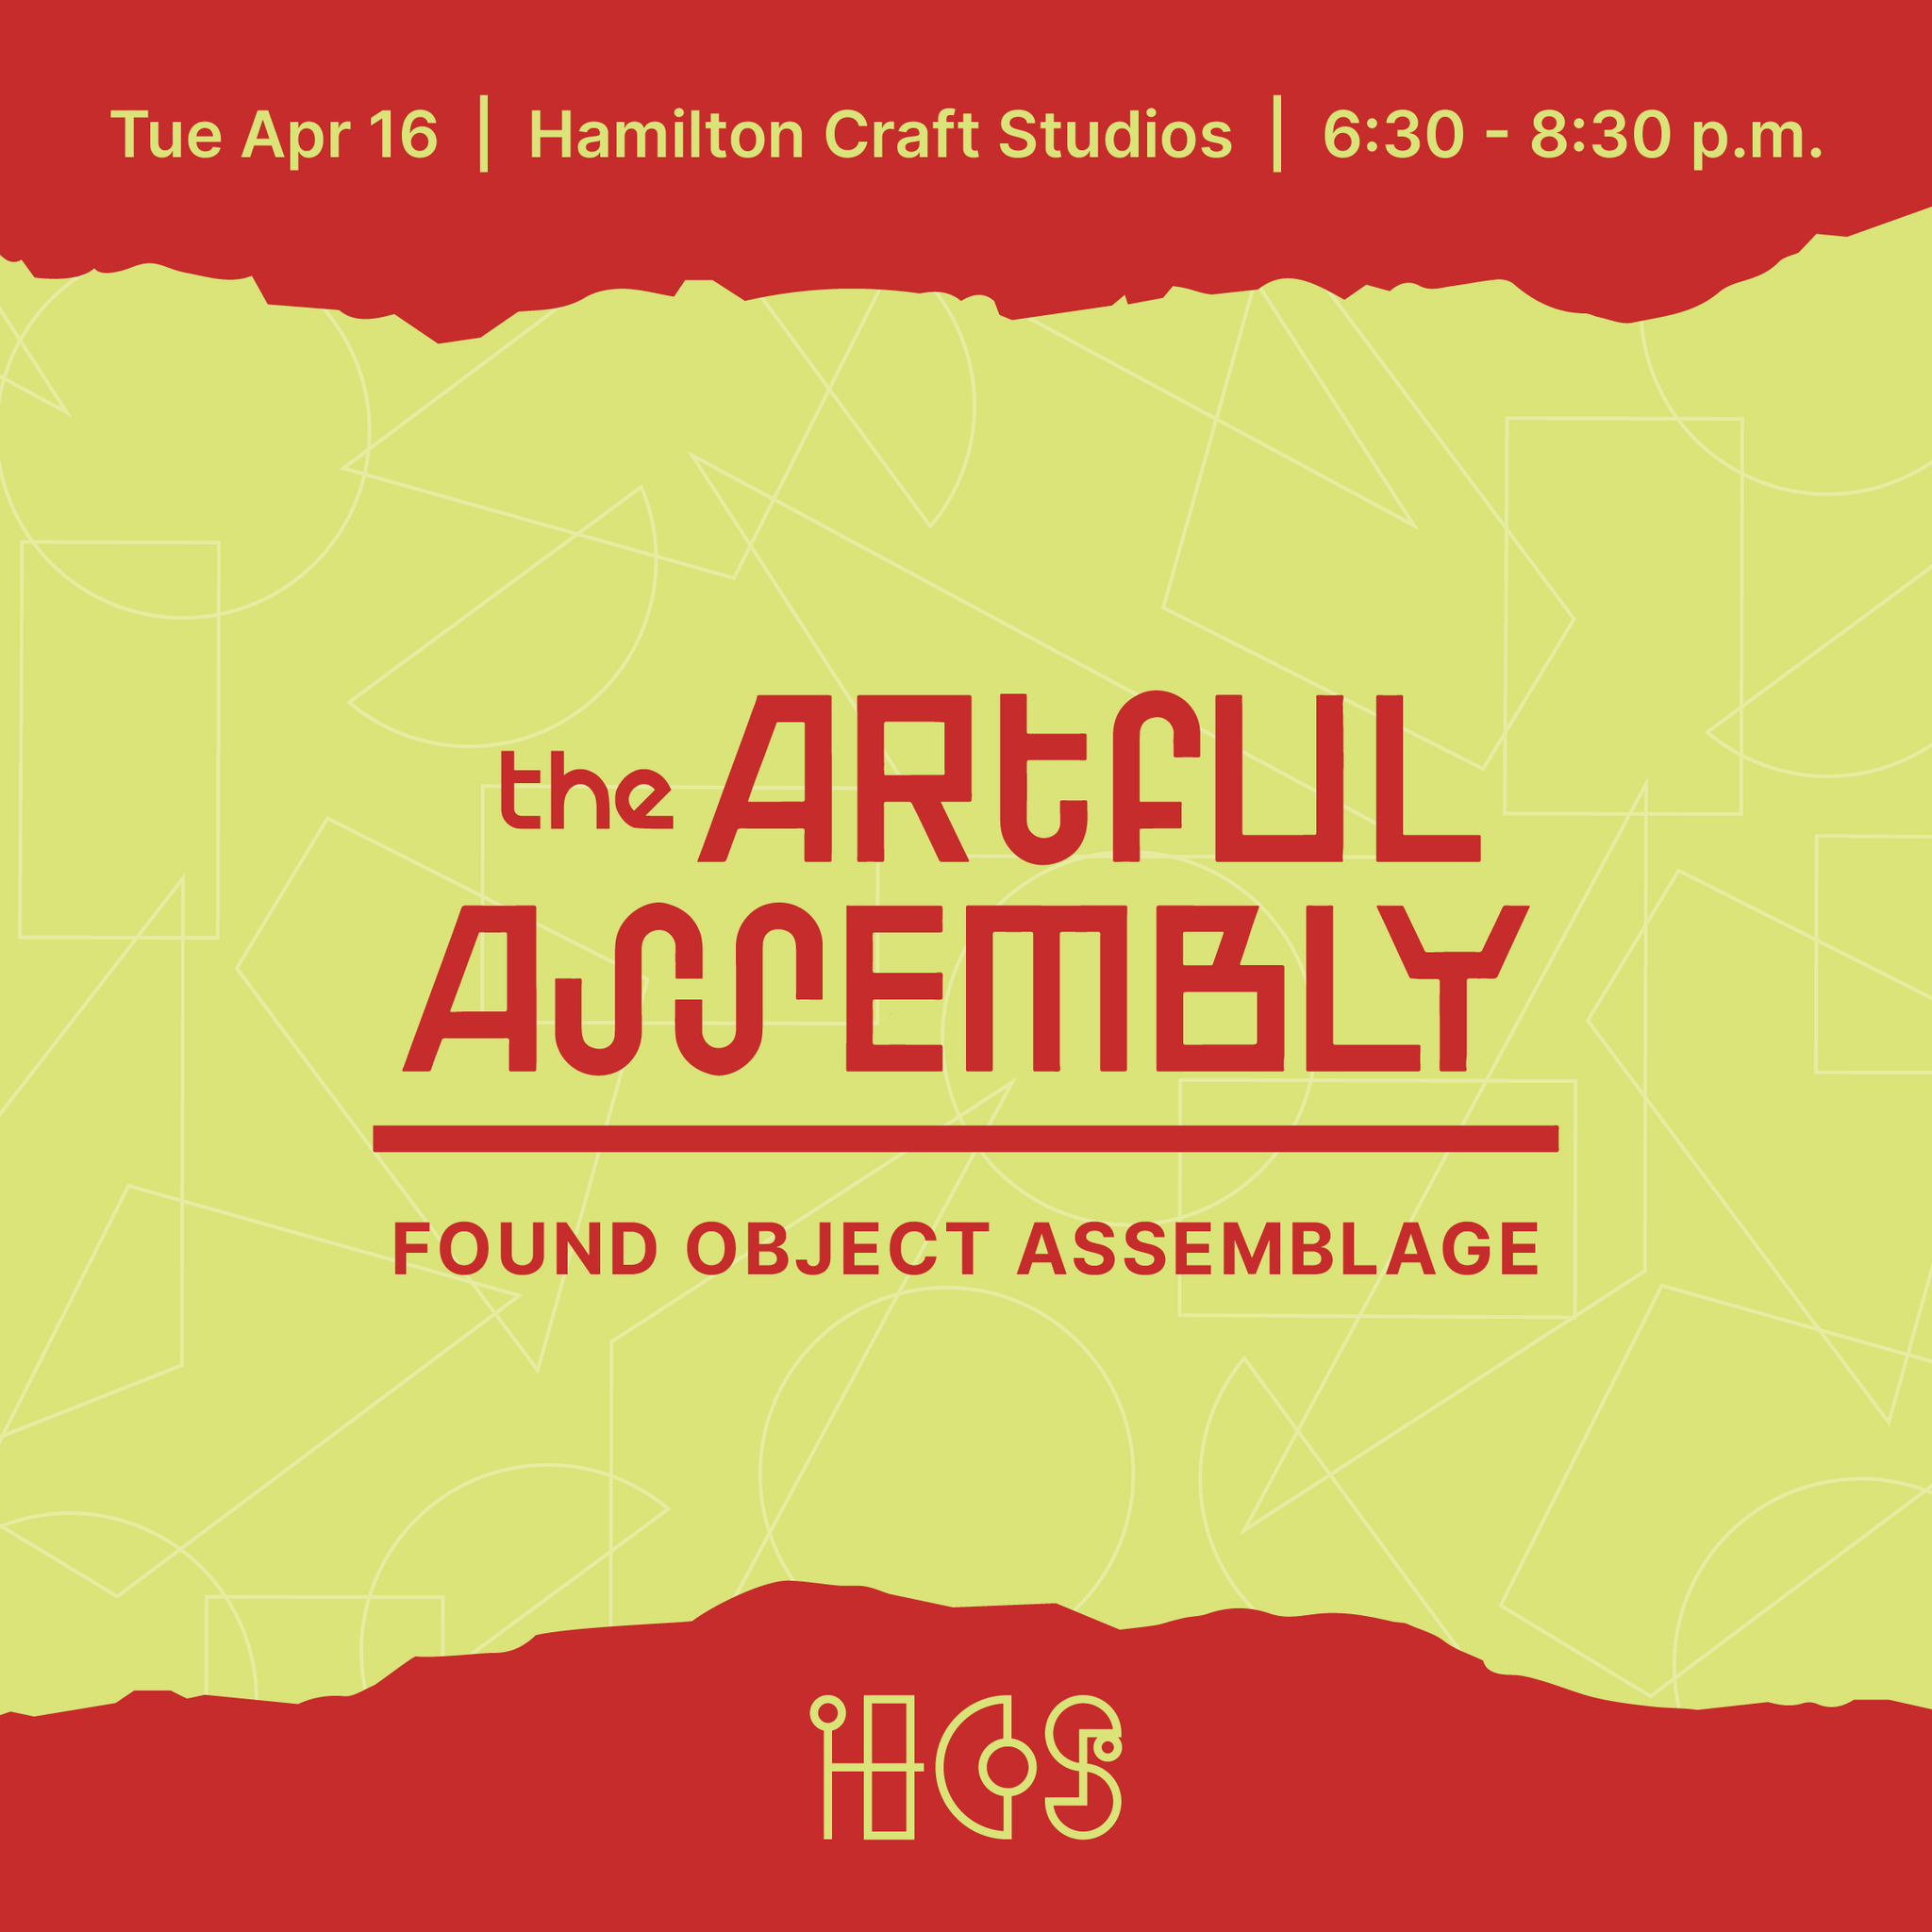 The Artful Assembly